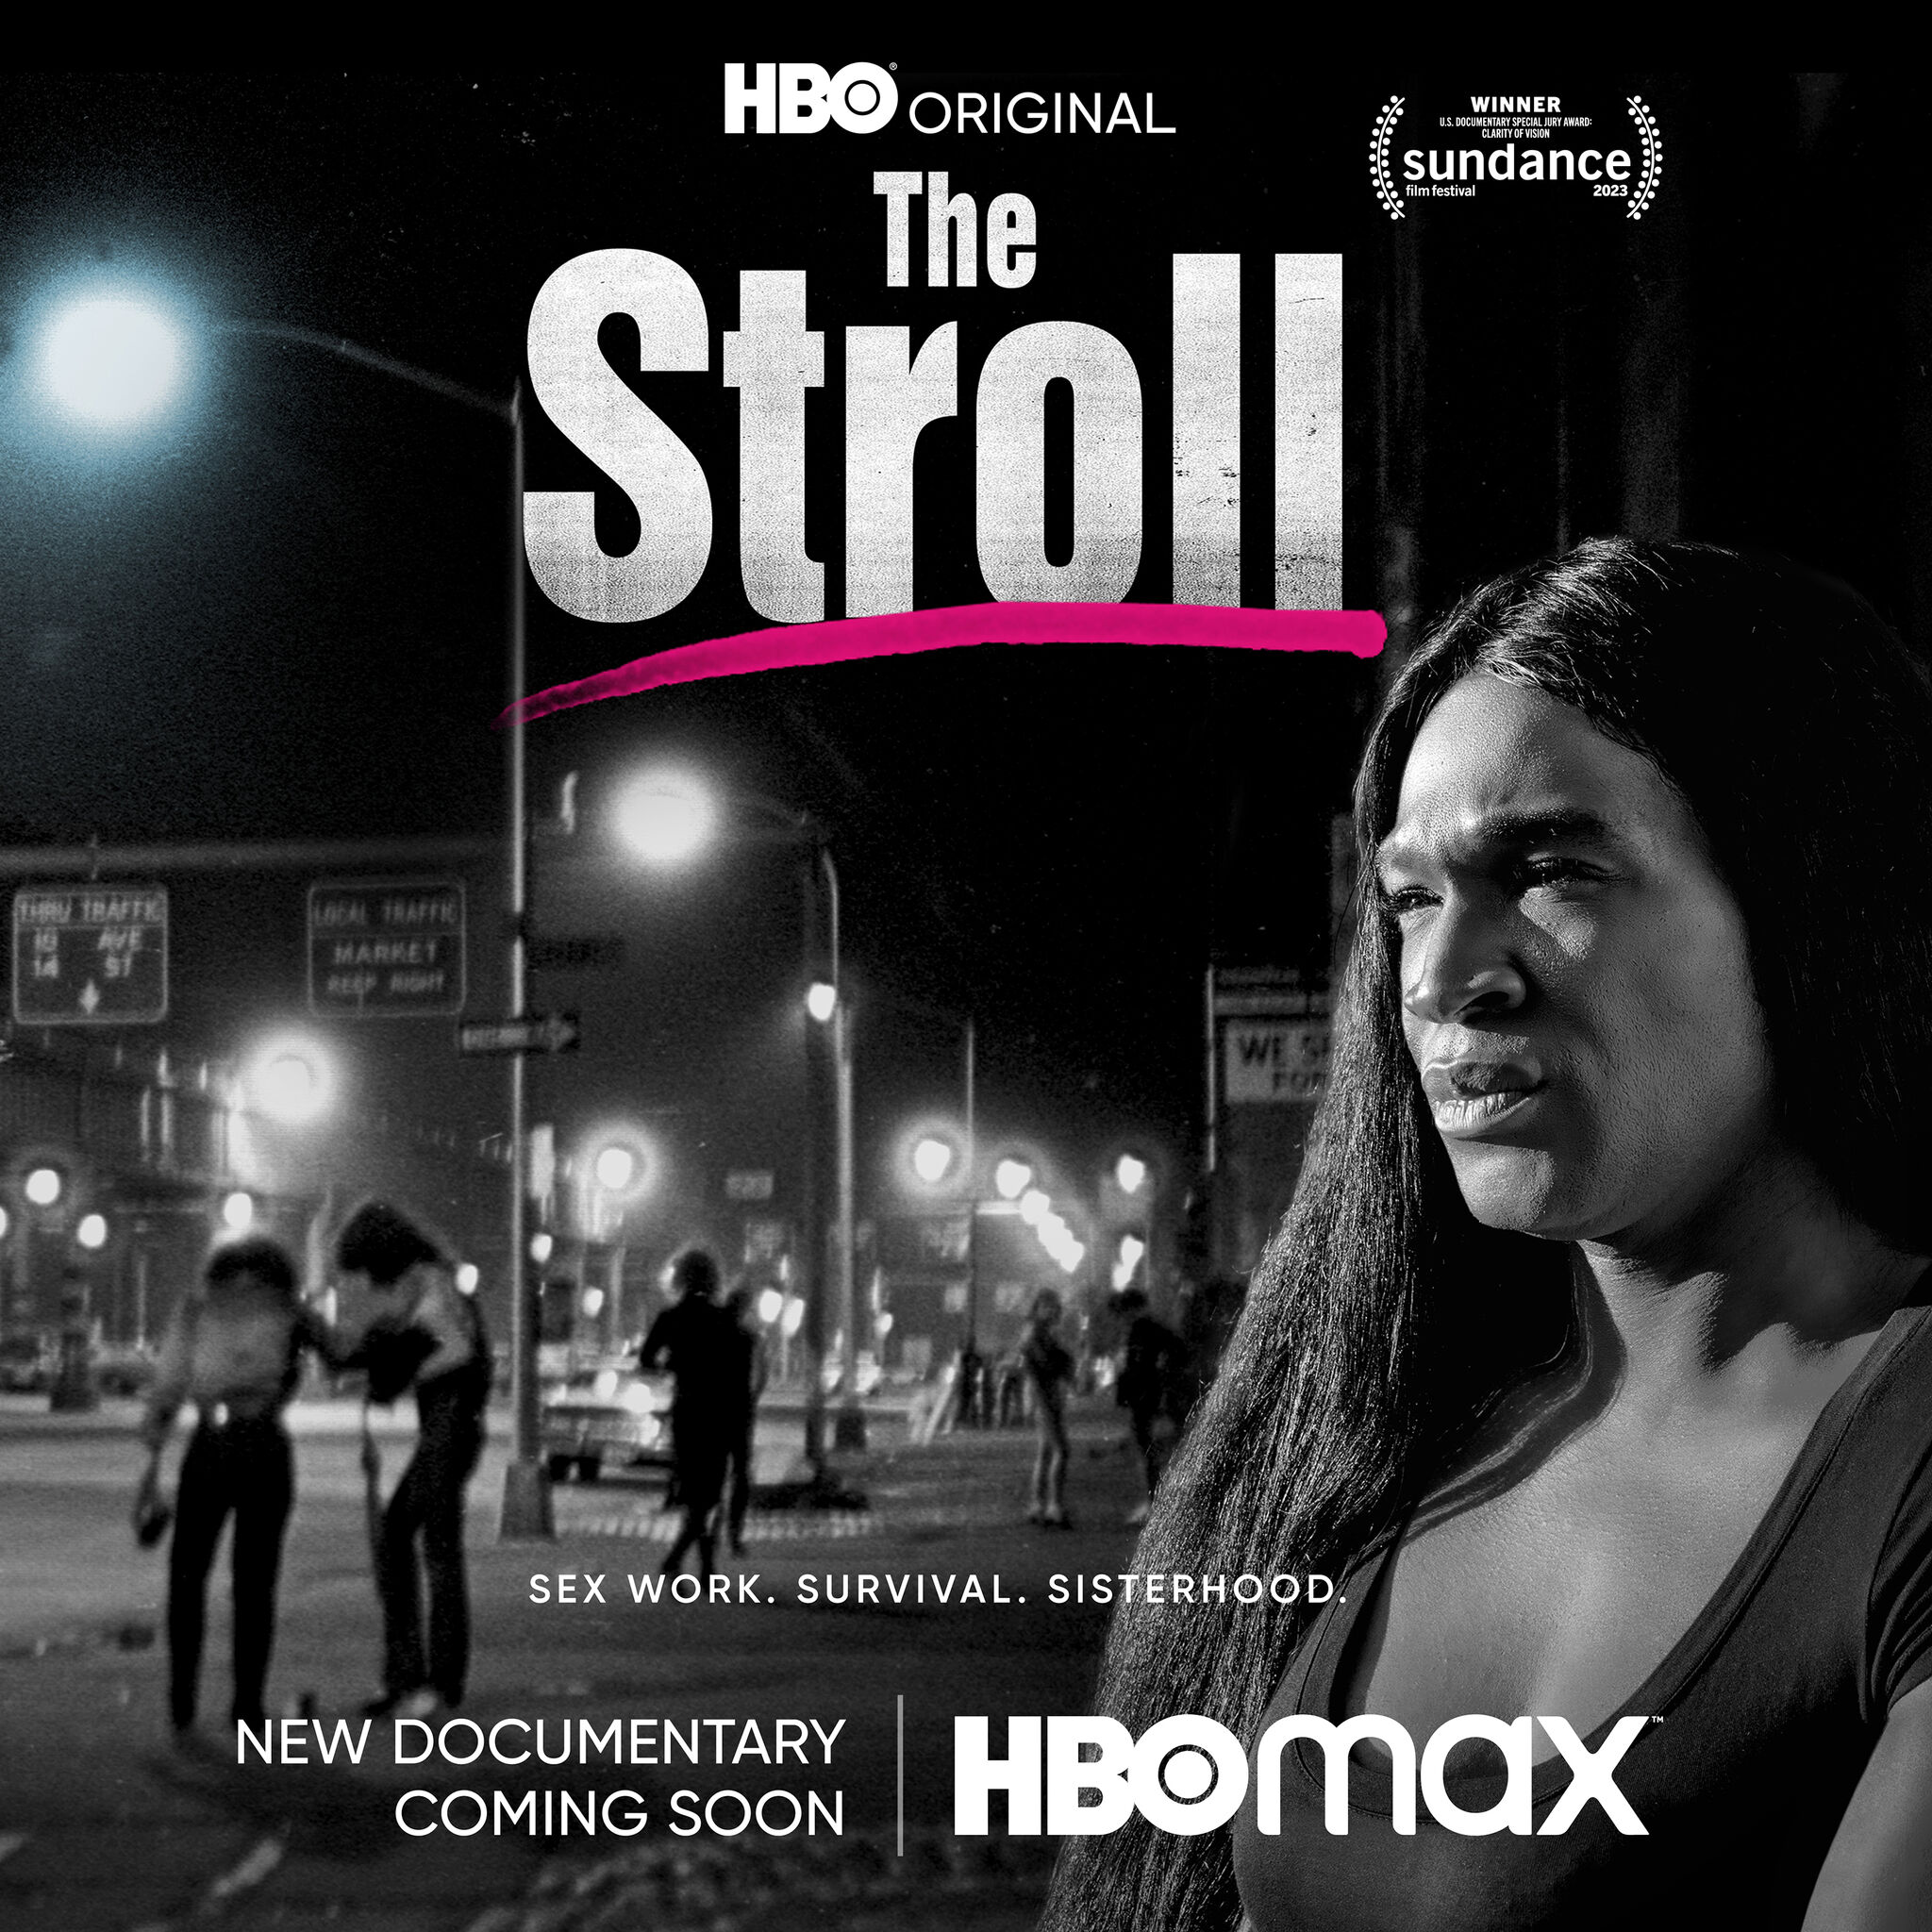 A movie poster for The Stroll from HBO. It shows a black and white photograph of a person gazing ahead. The text reads "The Stroll. Sex work. Survival. Sisterhood."